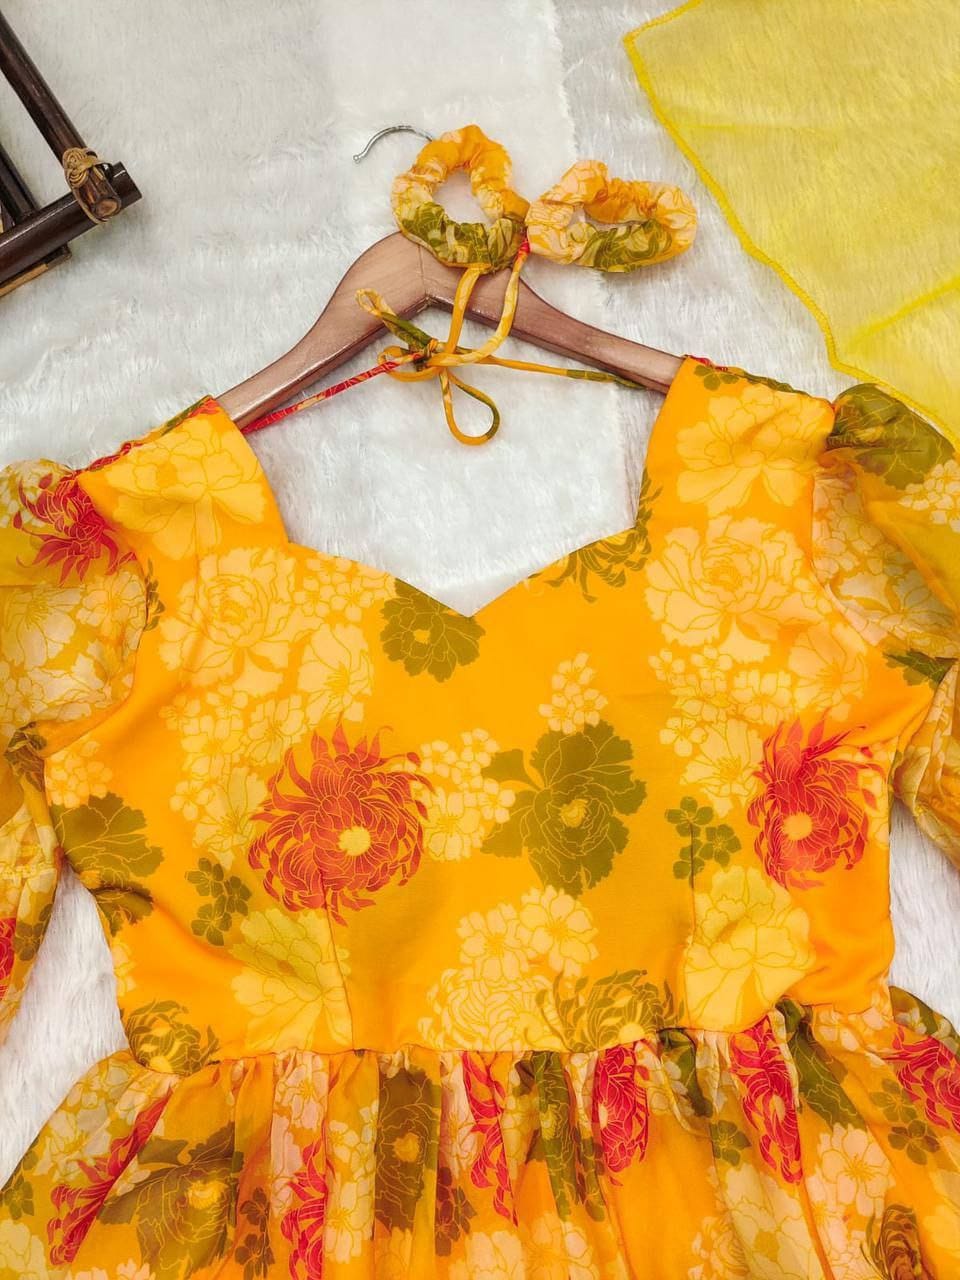 THIS STUNNING YELLOW ORGANZA FESTIVE WEAR SUIT!